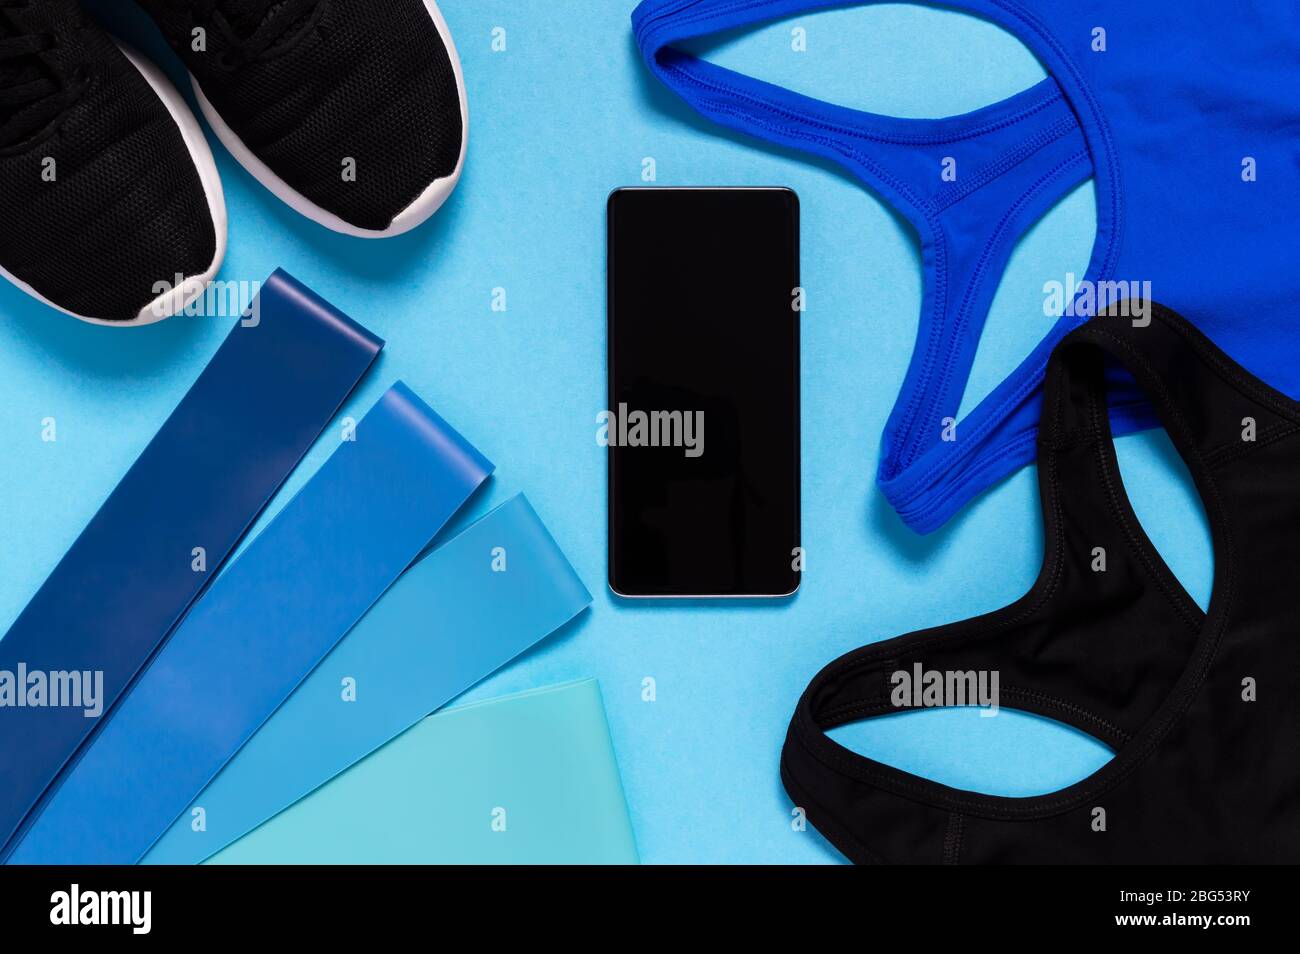 Flat lay of sports bra, running shoes, mobile phone and resistance bands on blue background. Sports equipment for fitness at home. Healthy lifestyle, Stock Photo